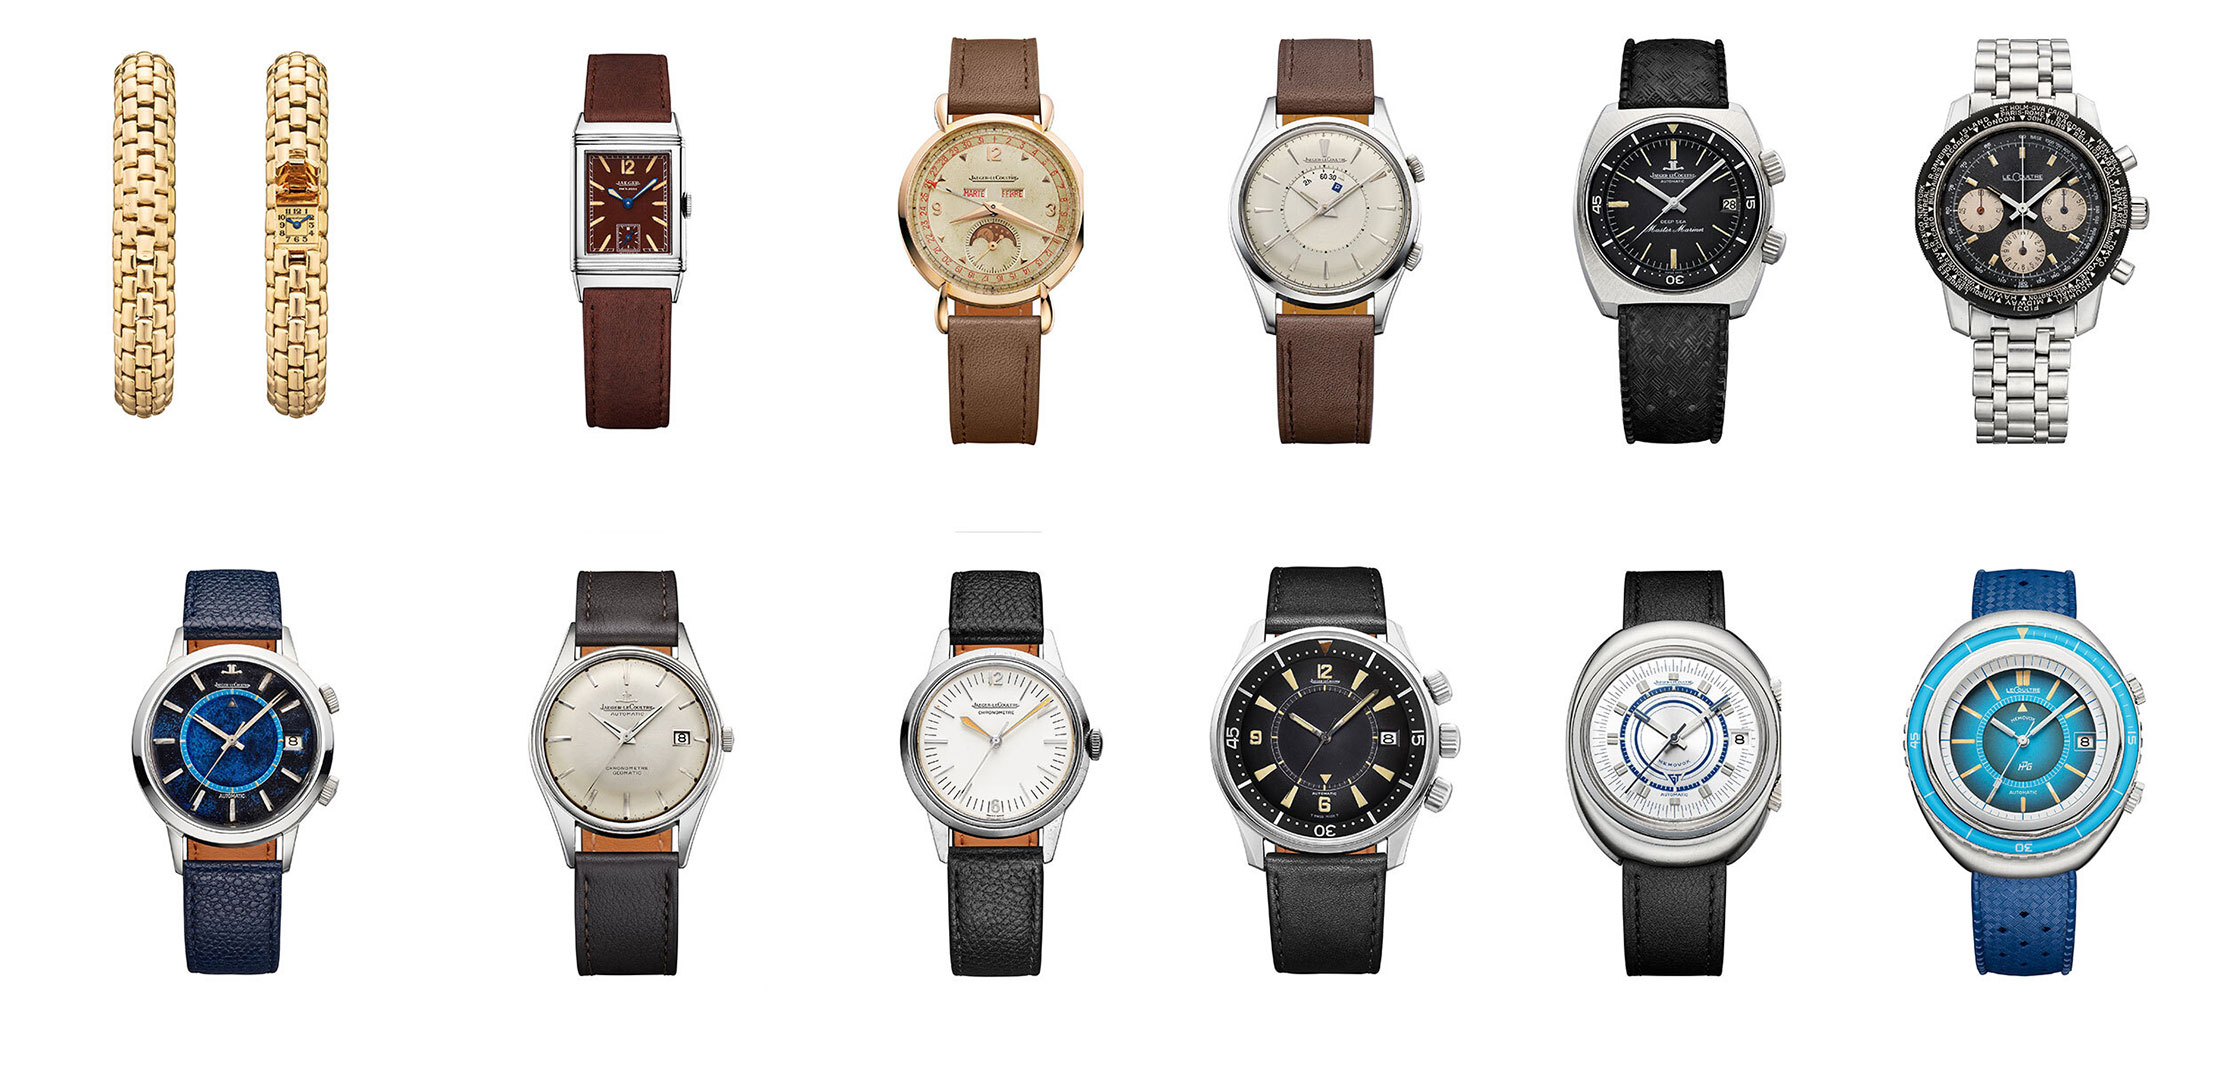 Jaeger-Lecoultre Replica Watches